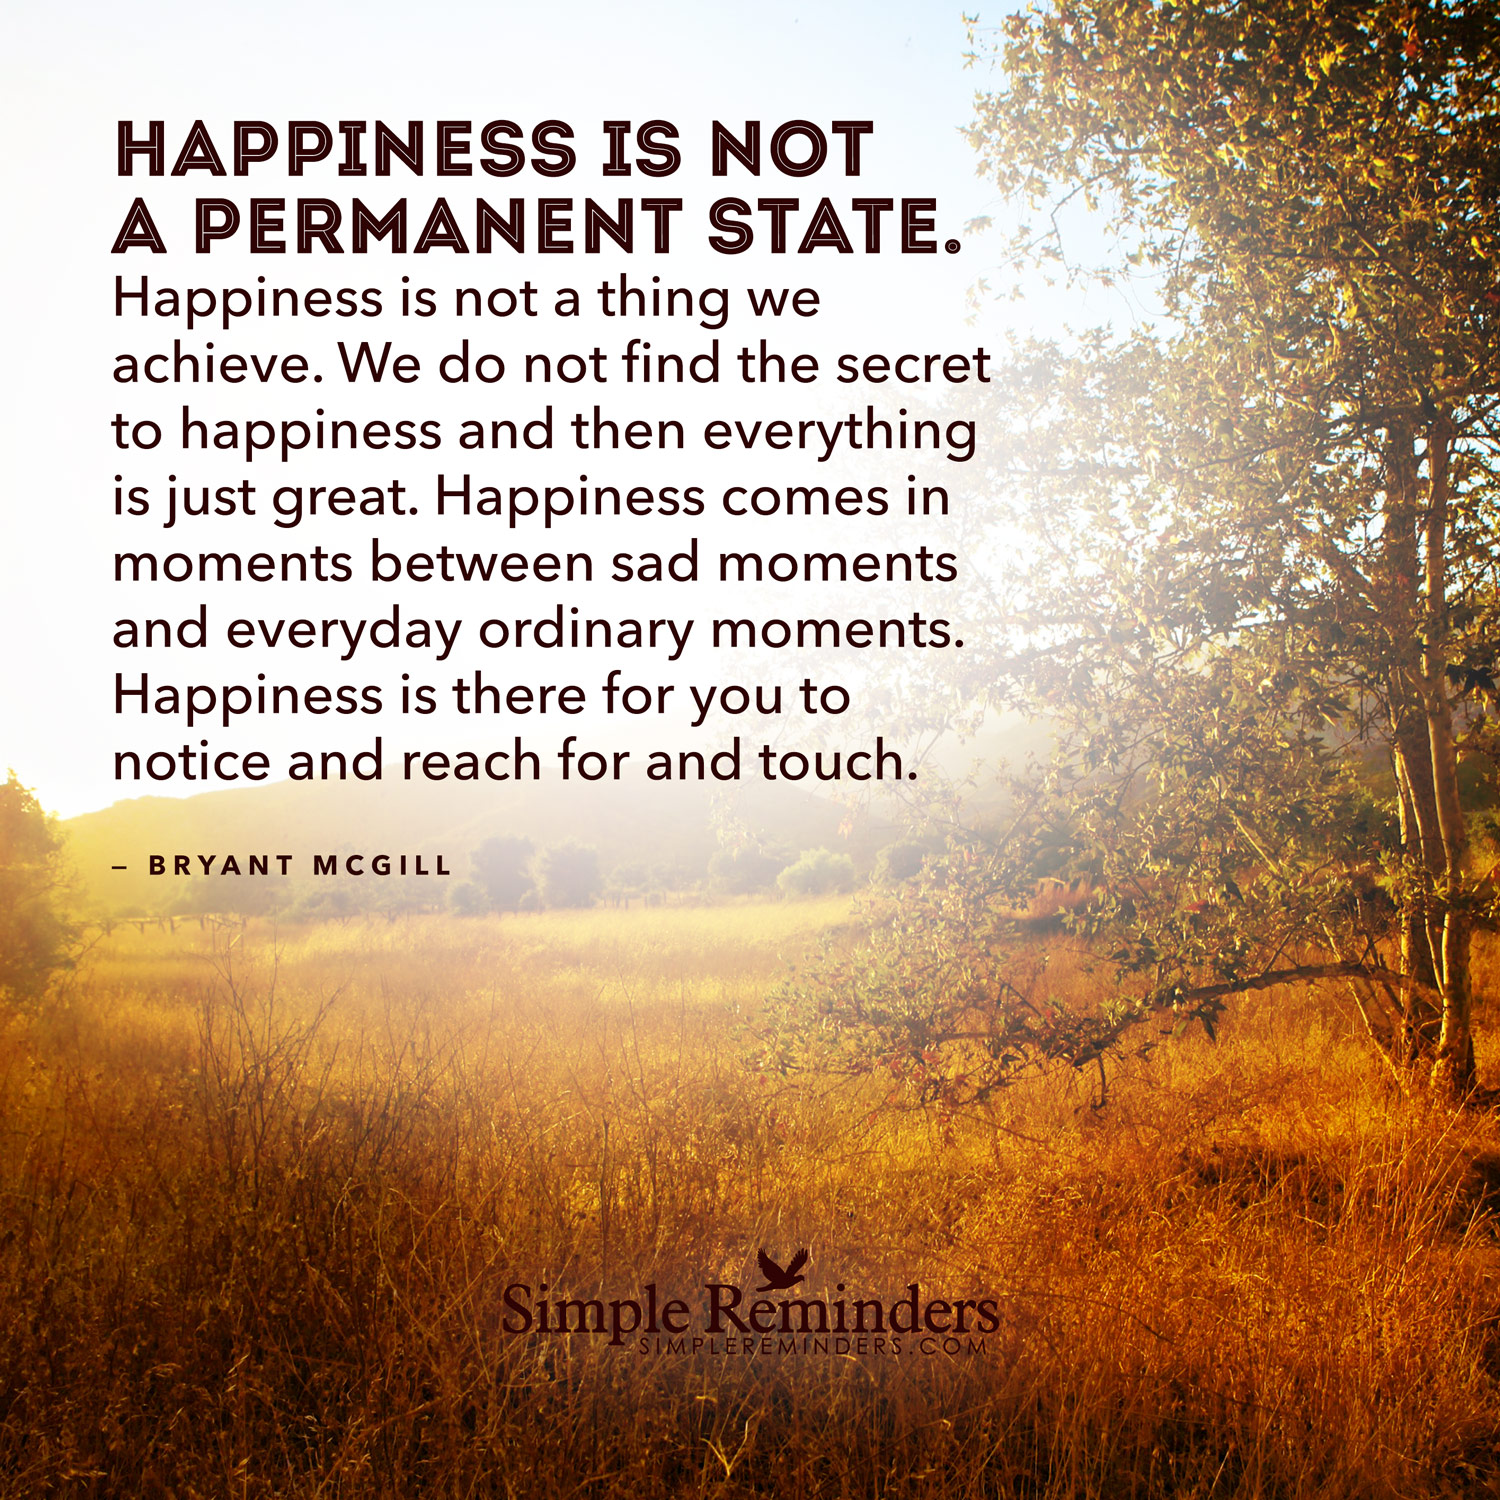 Happiness is not a permanent state by Bryant McGill